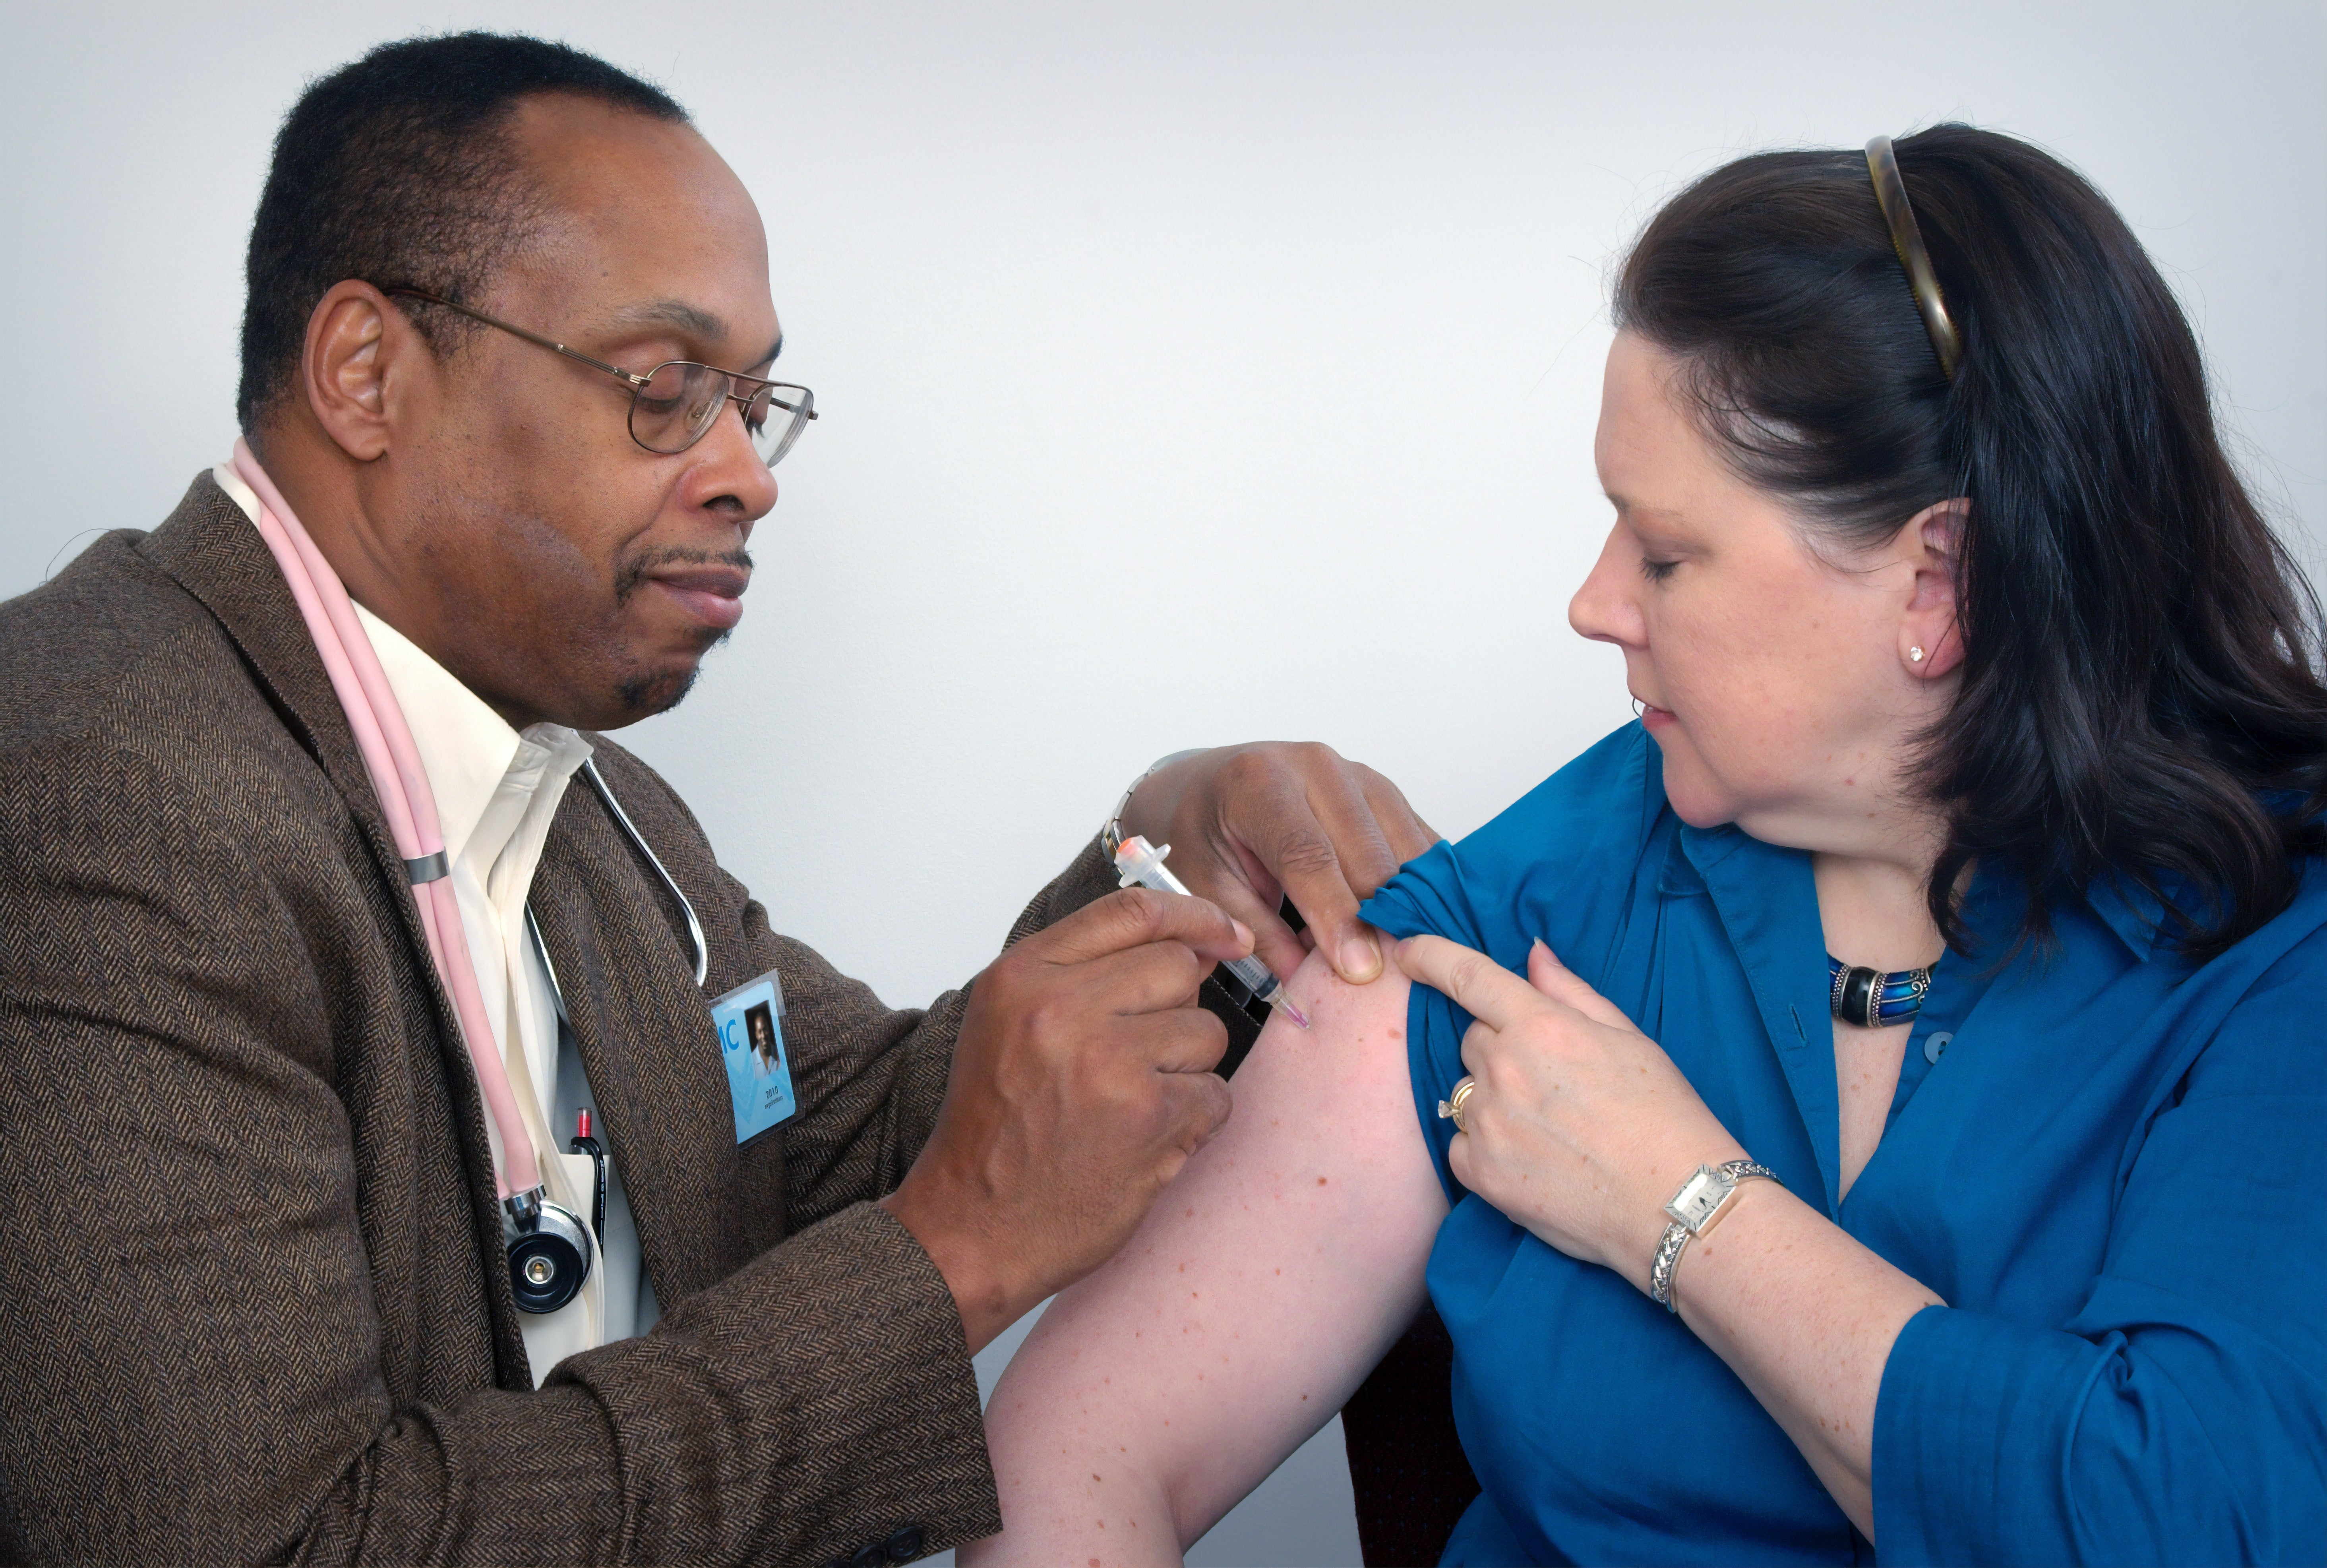 Doctor administering COVID-19 vaccine to patient